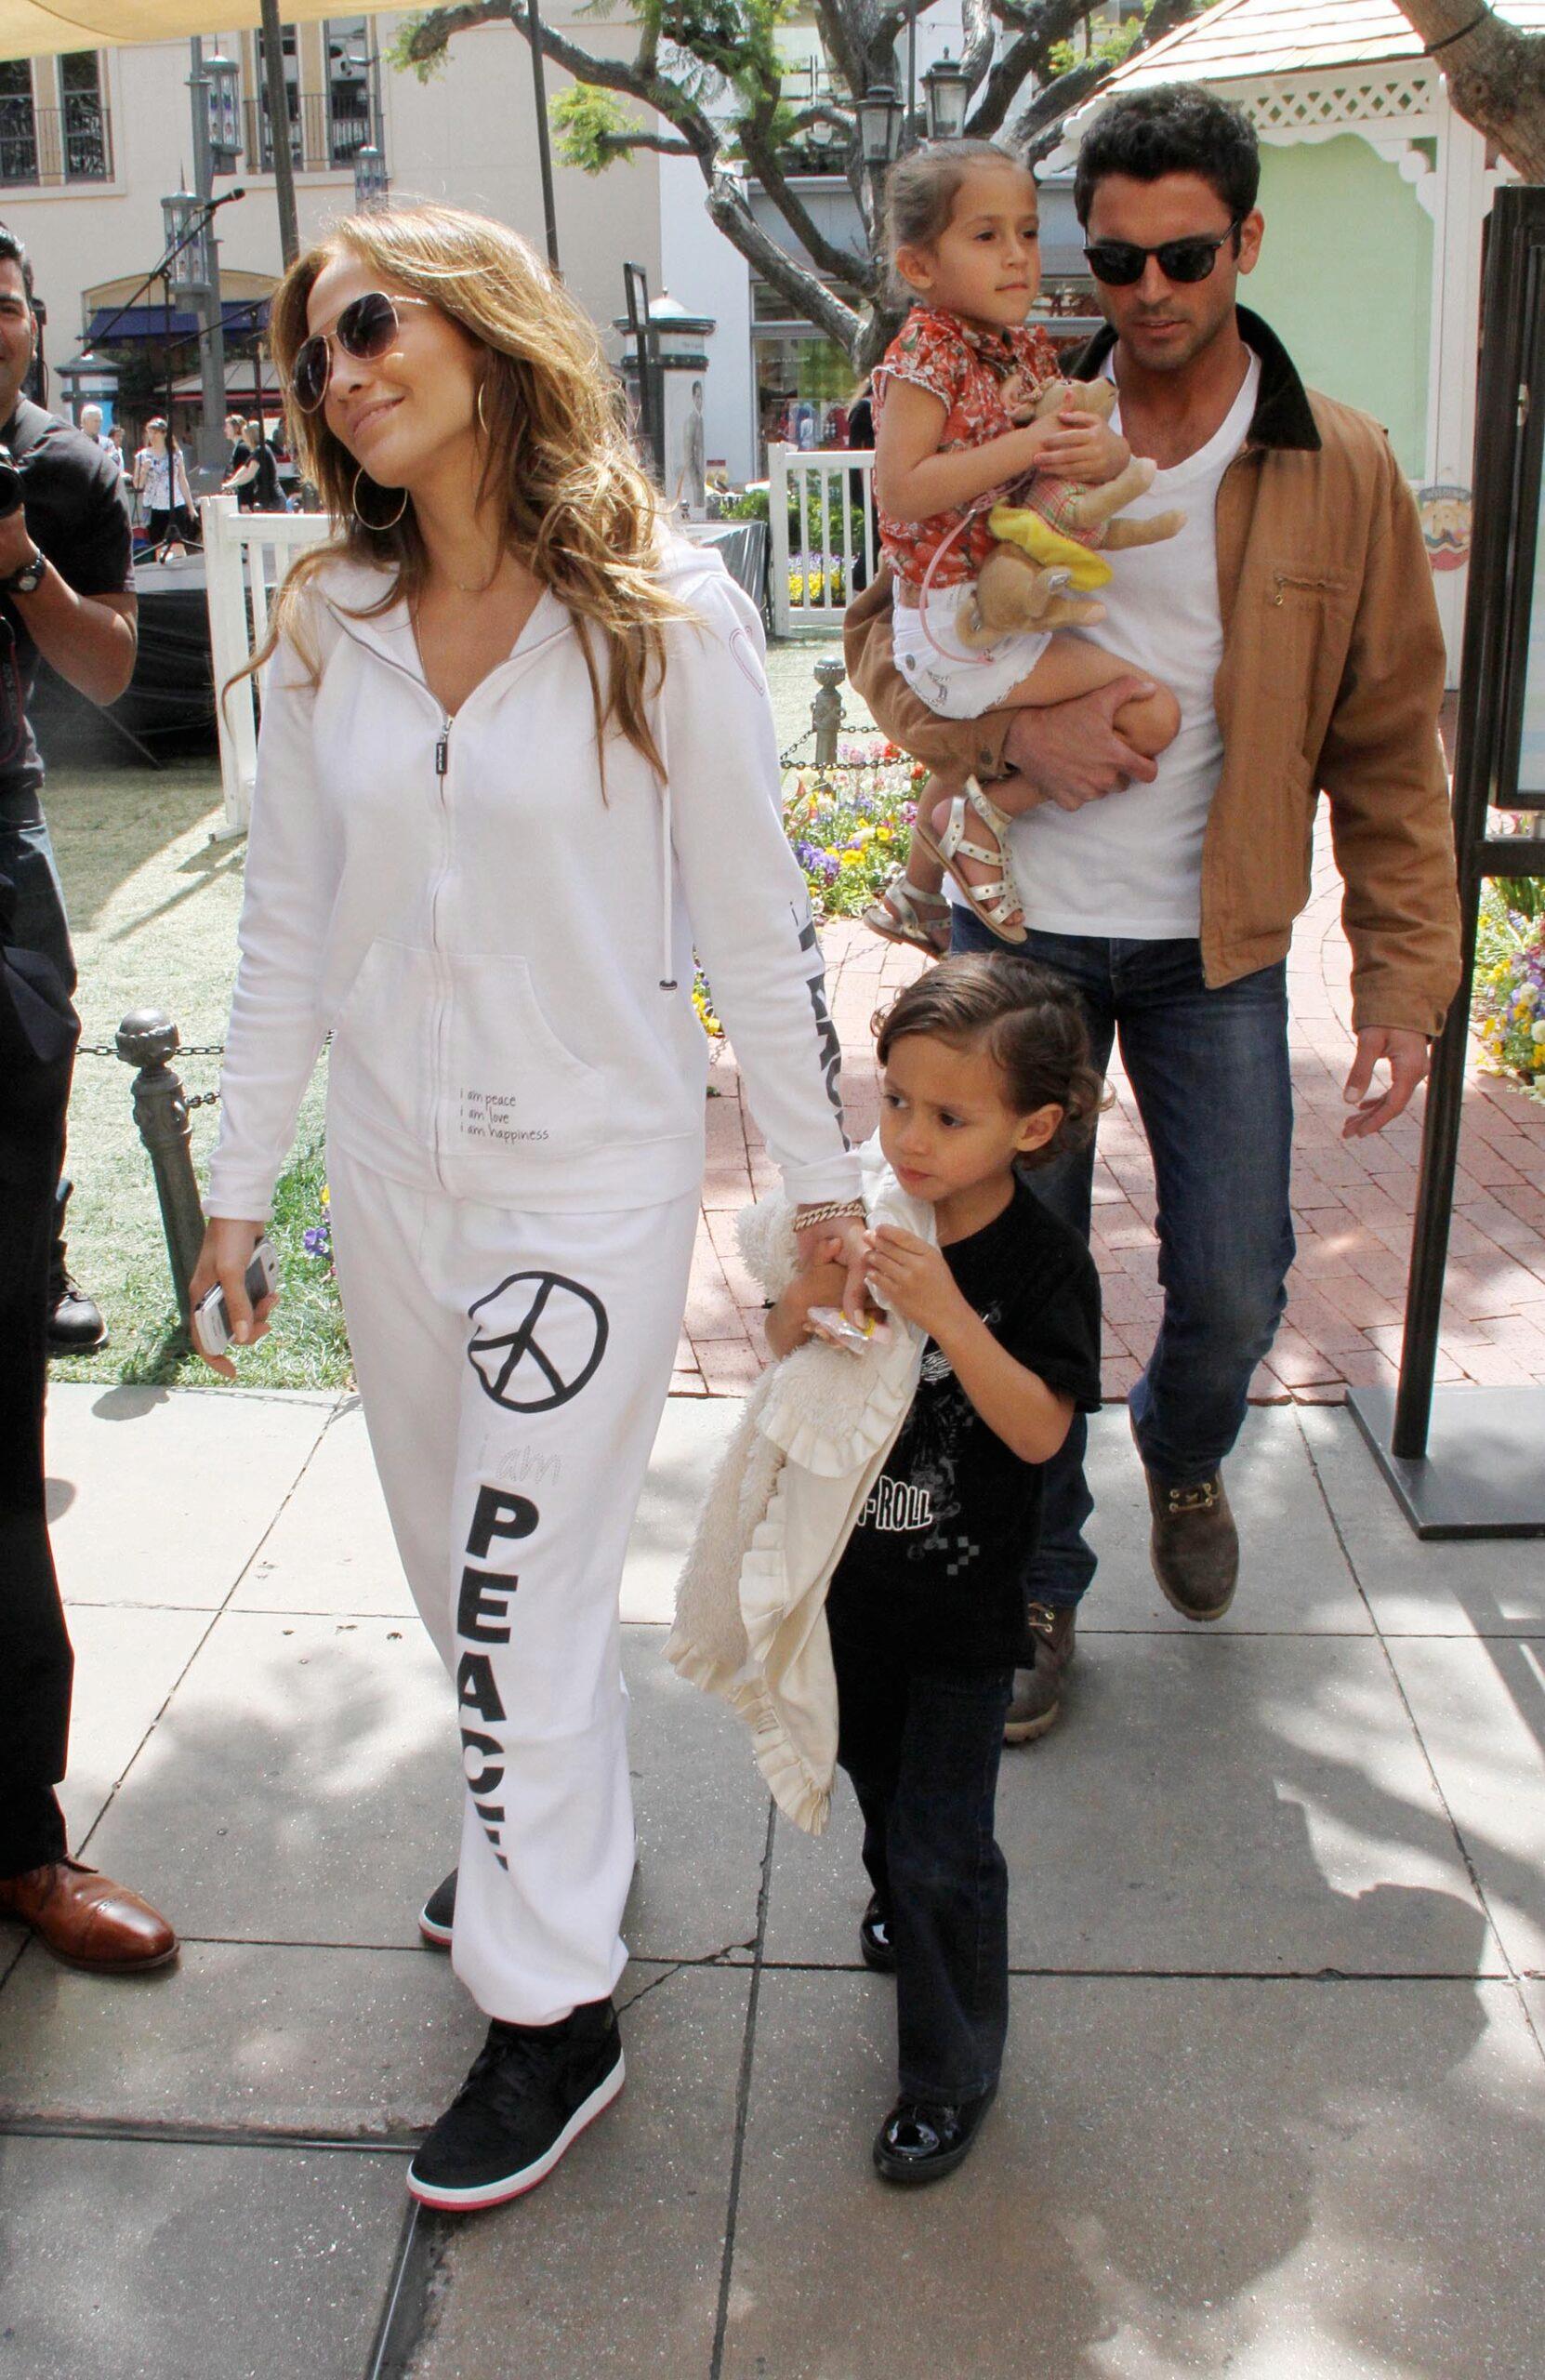 JENNIFER LOPEZ AND MARC ANTHONY TAKES THE KIDS TO MEET THE EASTER BUNNY